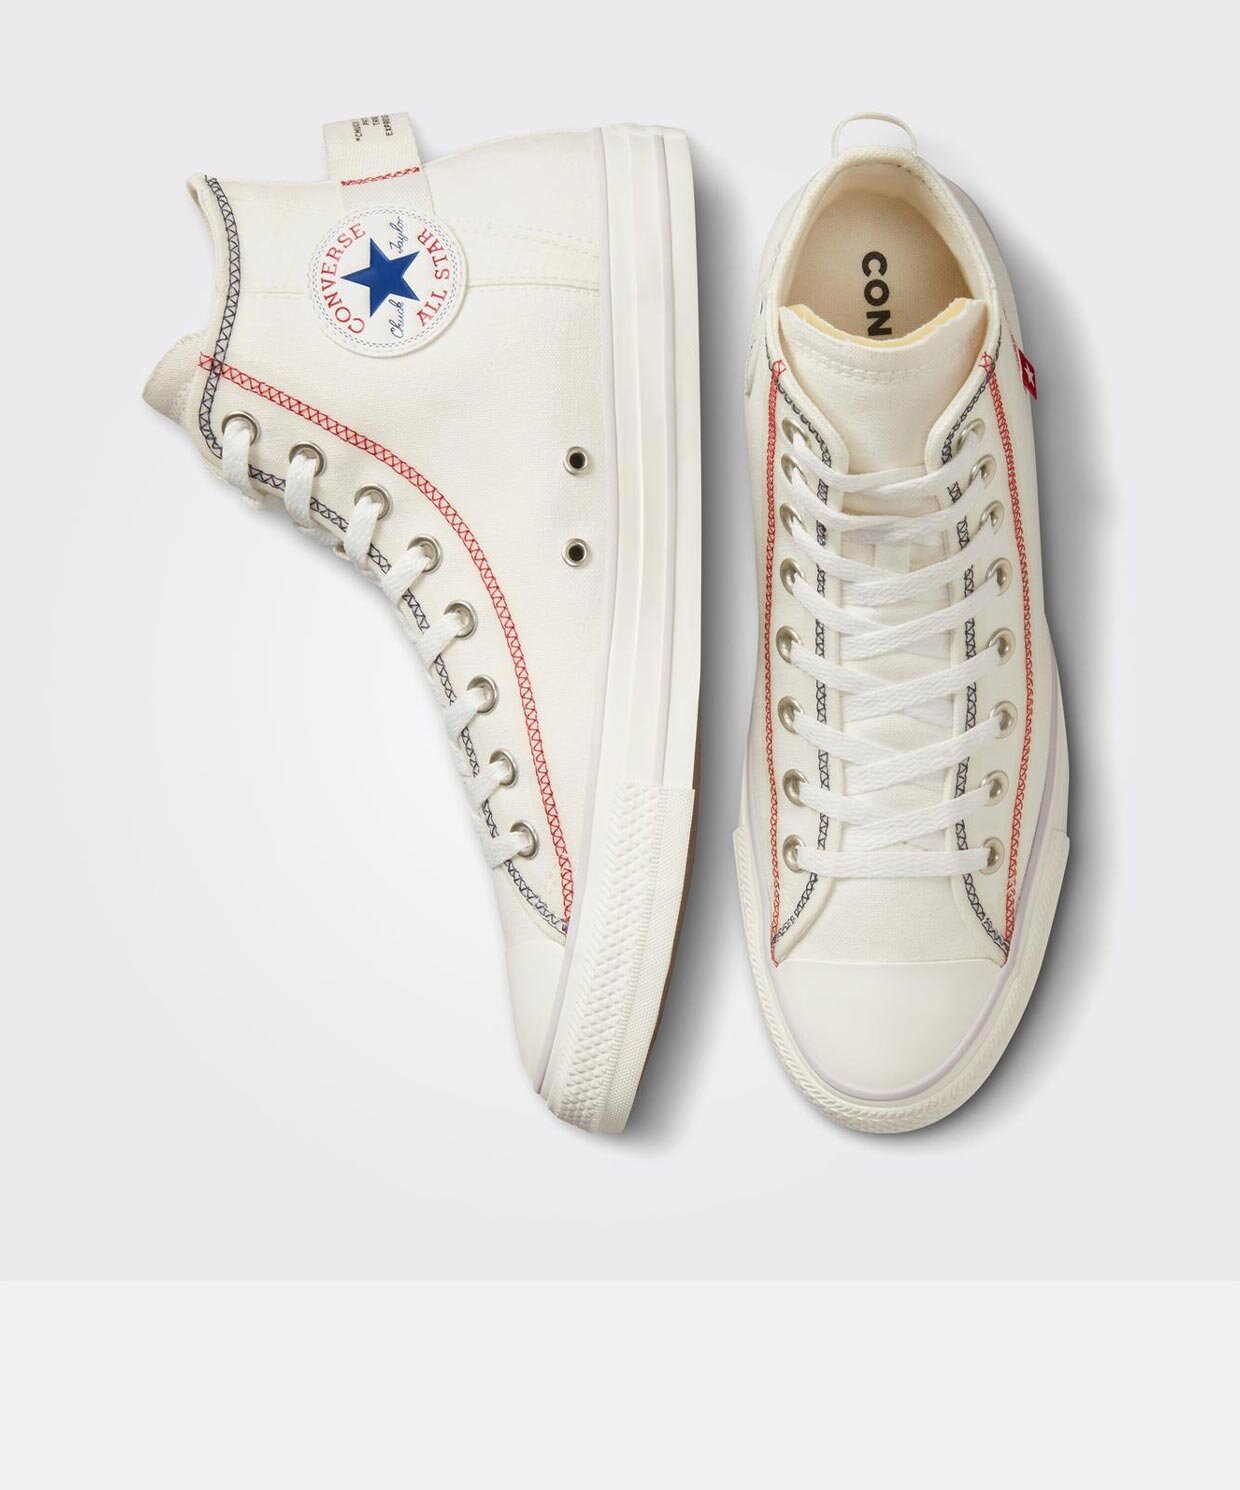 resm Converse Chuck Taylor All Star